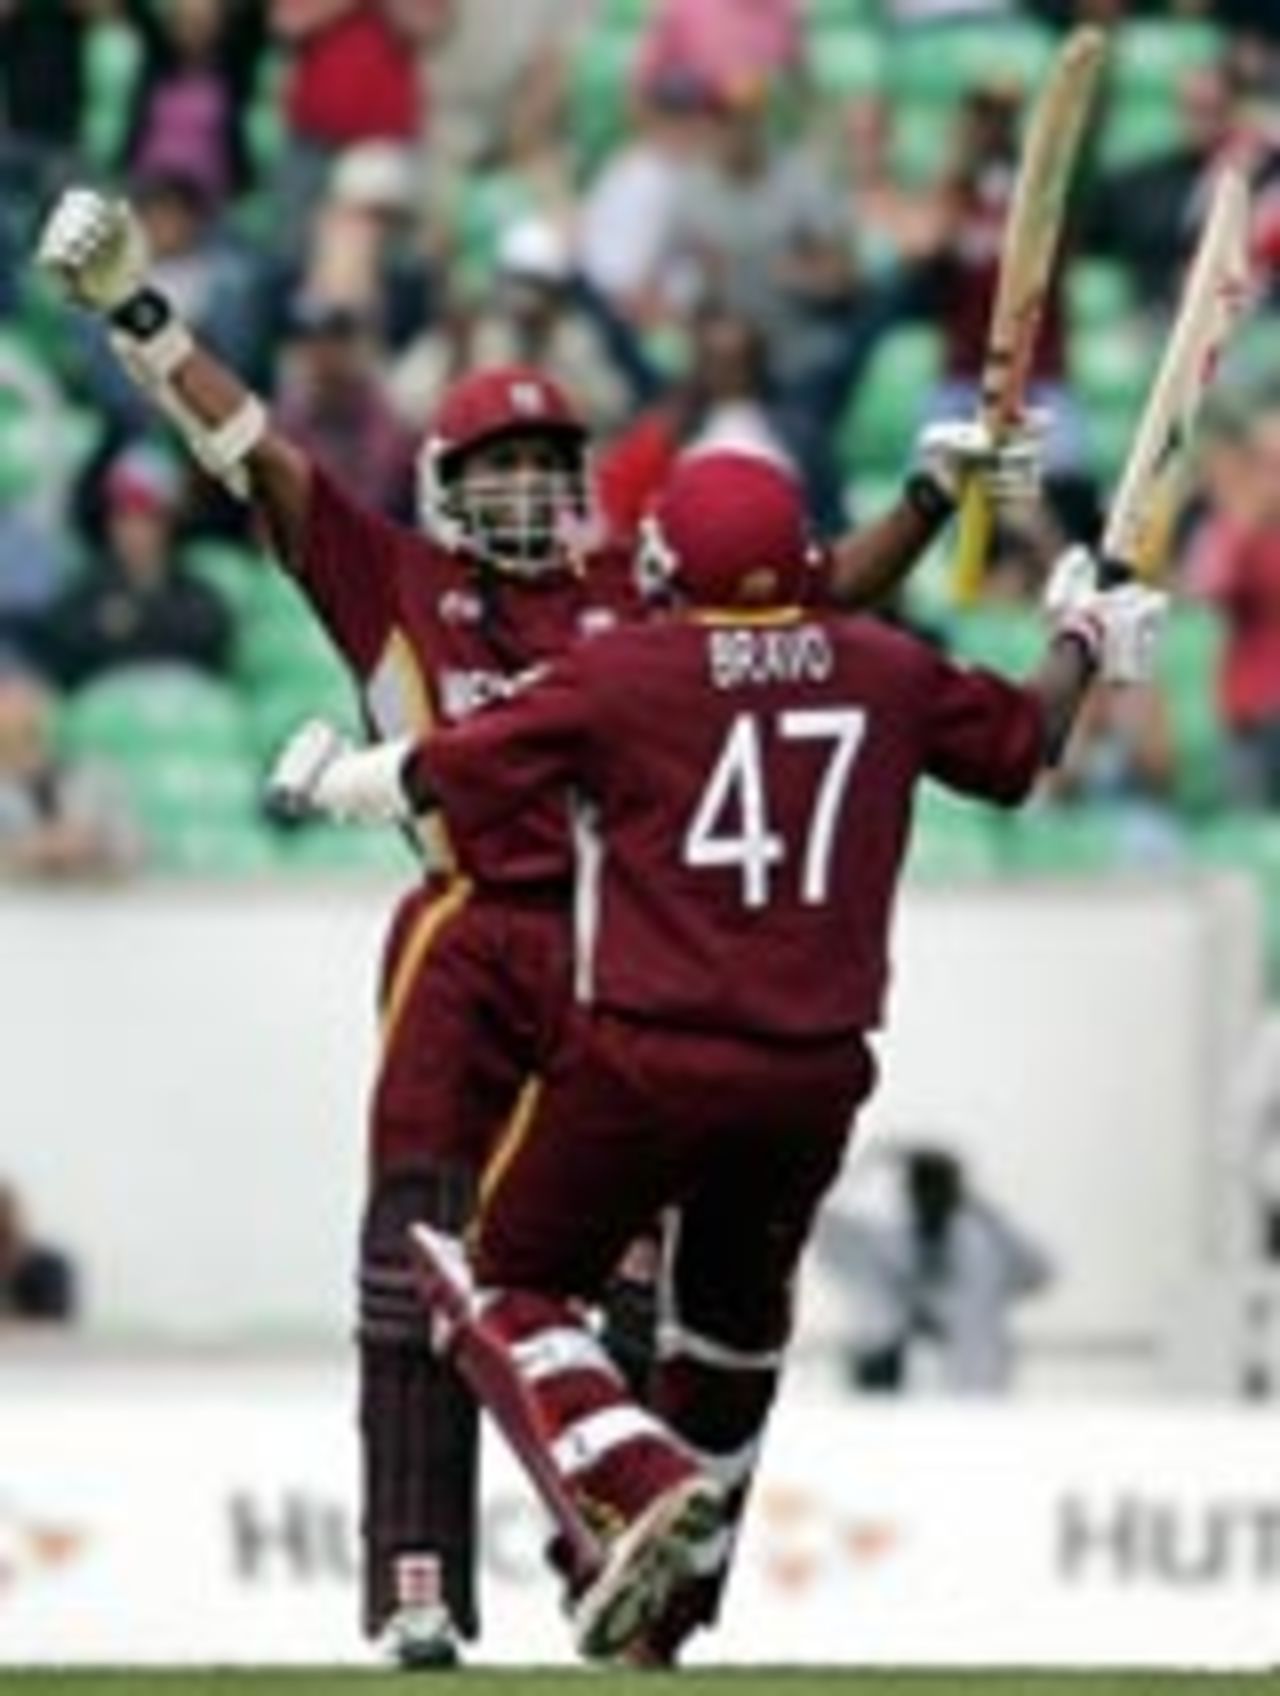 Shivnarine chanderpaul celebrates a win, West Indies v South Africa, ICC Champions Trophy, September 19 2004